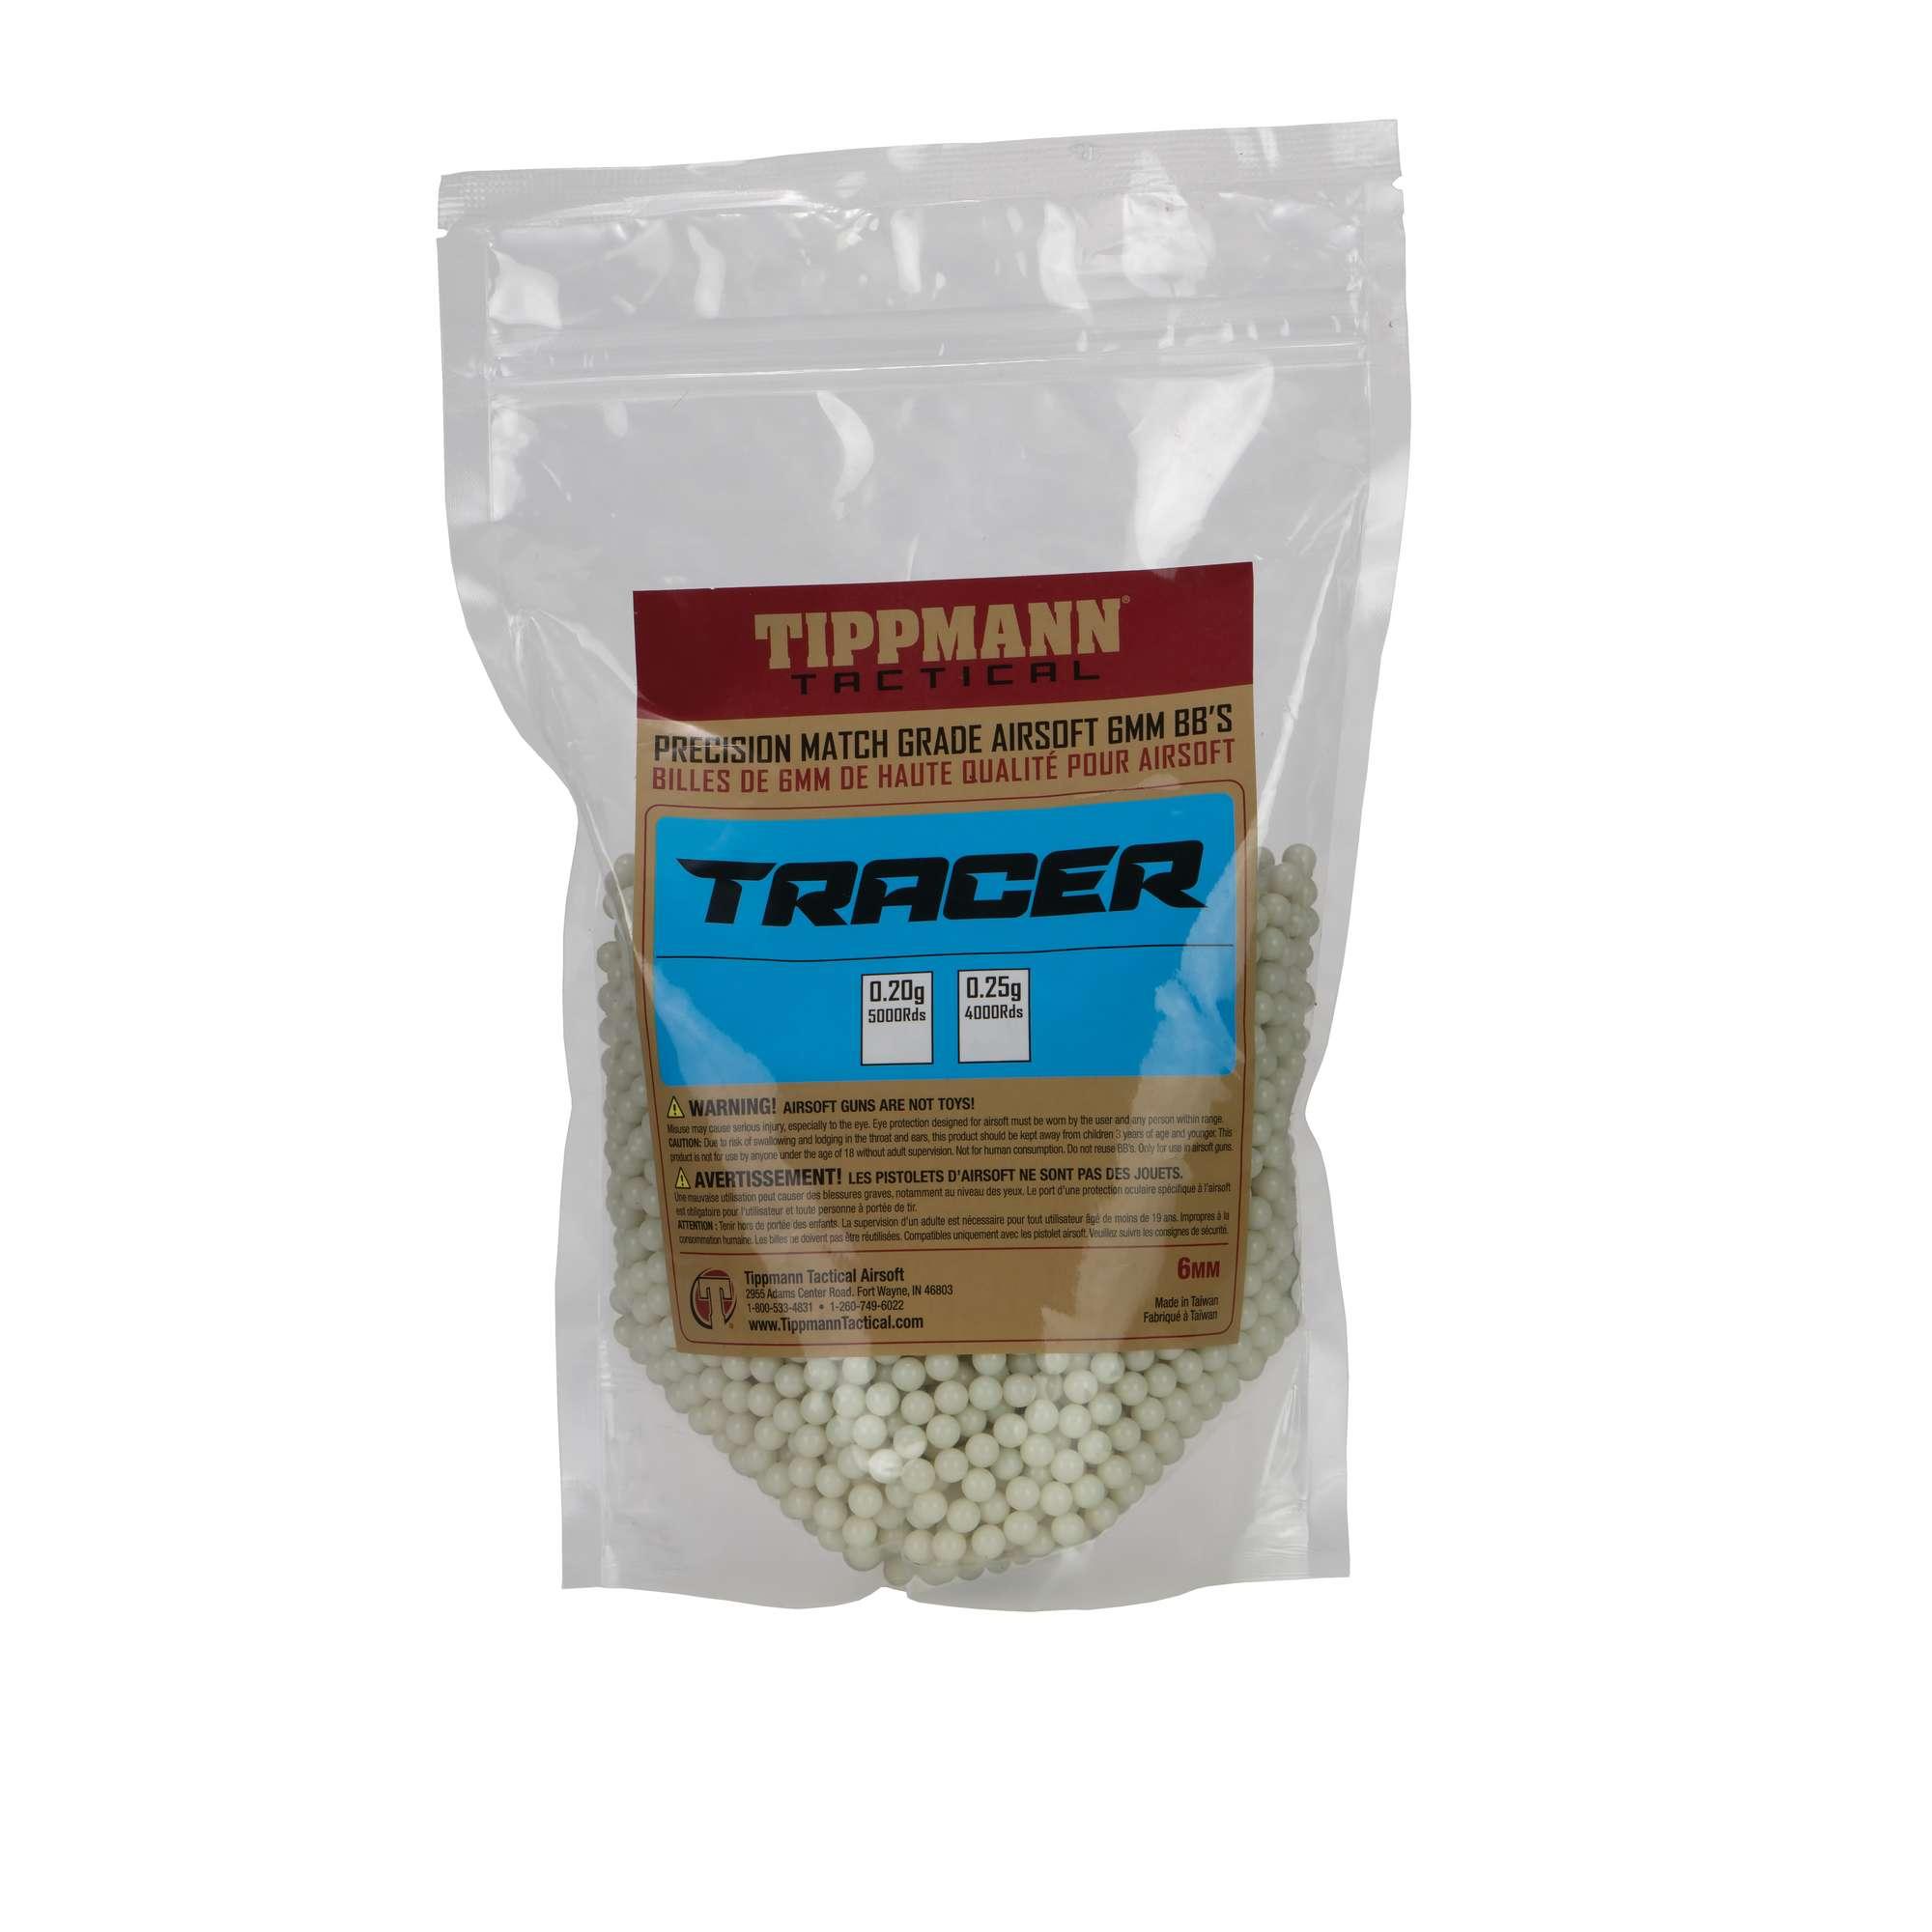 Tippmann Tactical Tracer Airsoft Ammo 20g 5K Glow